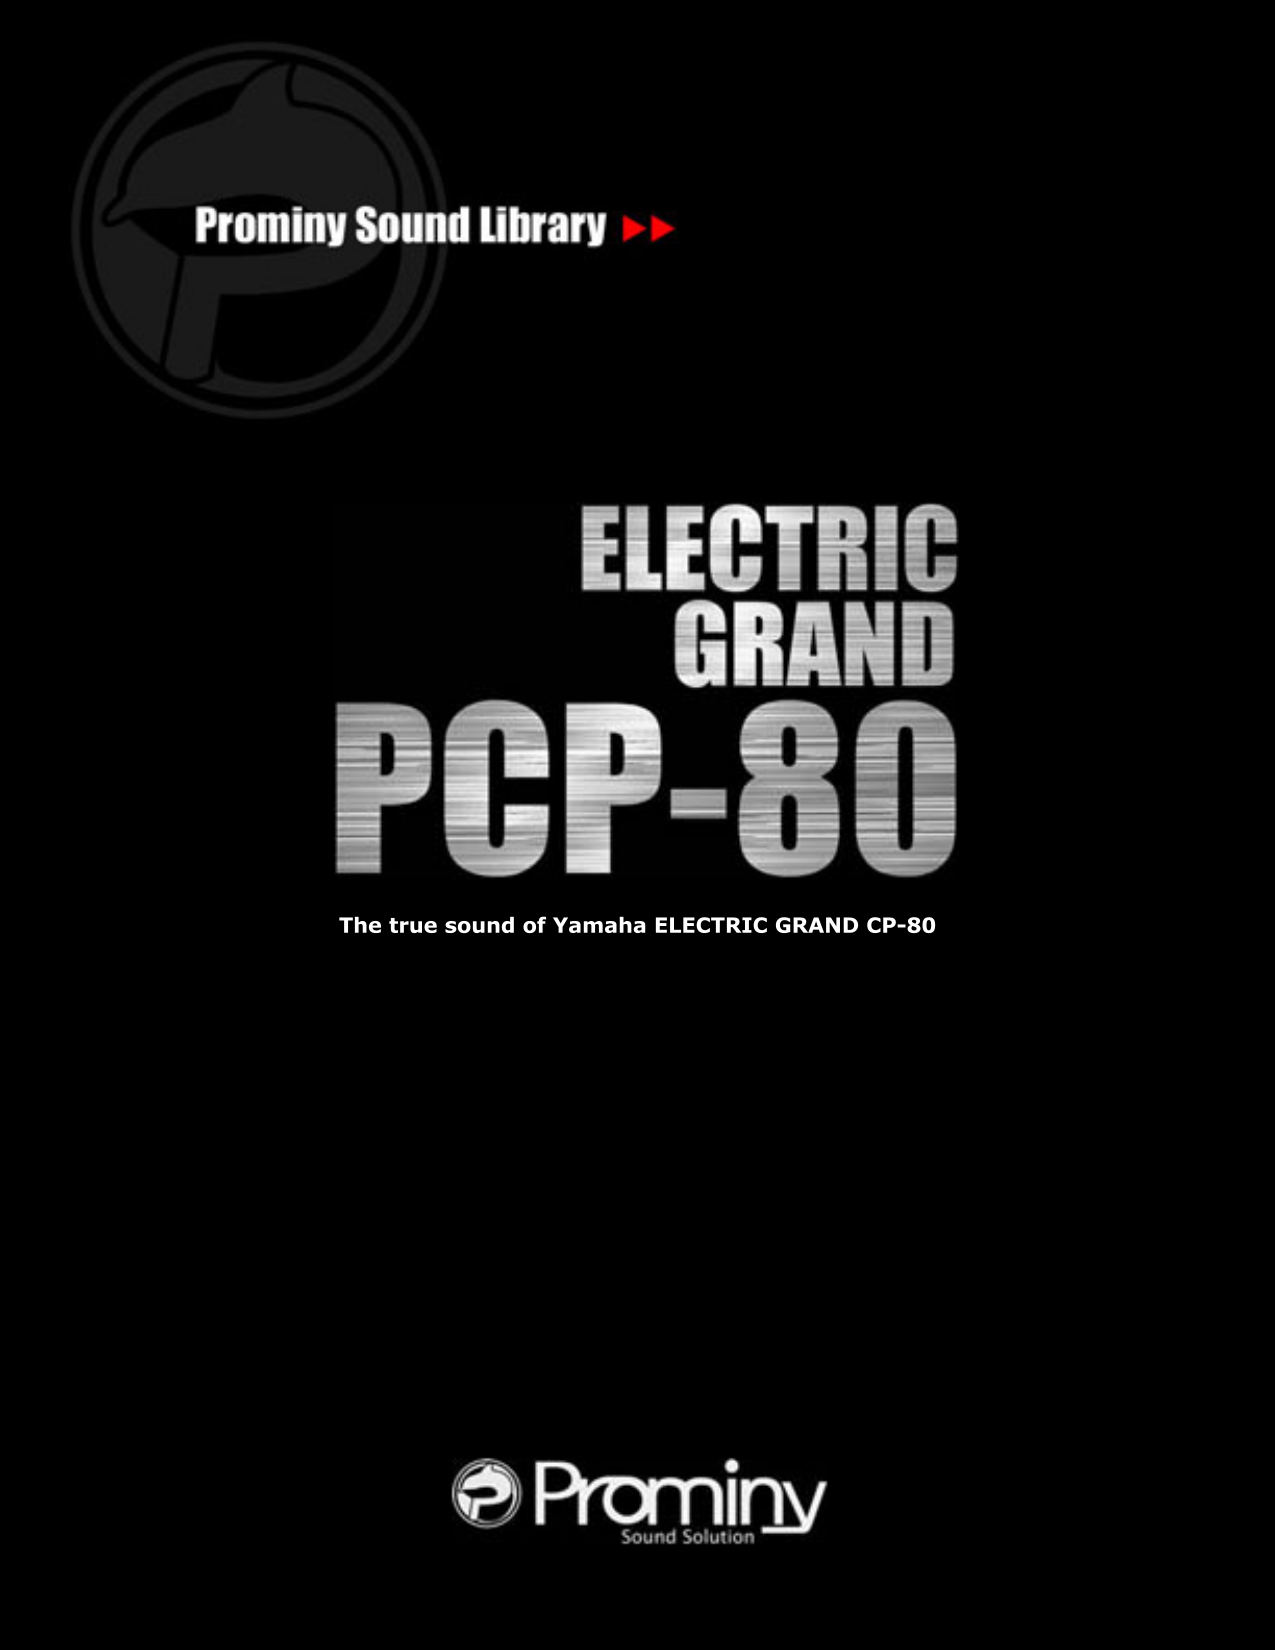 Prominy Electric Grand Pcp-80